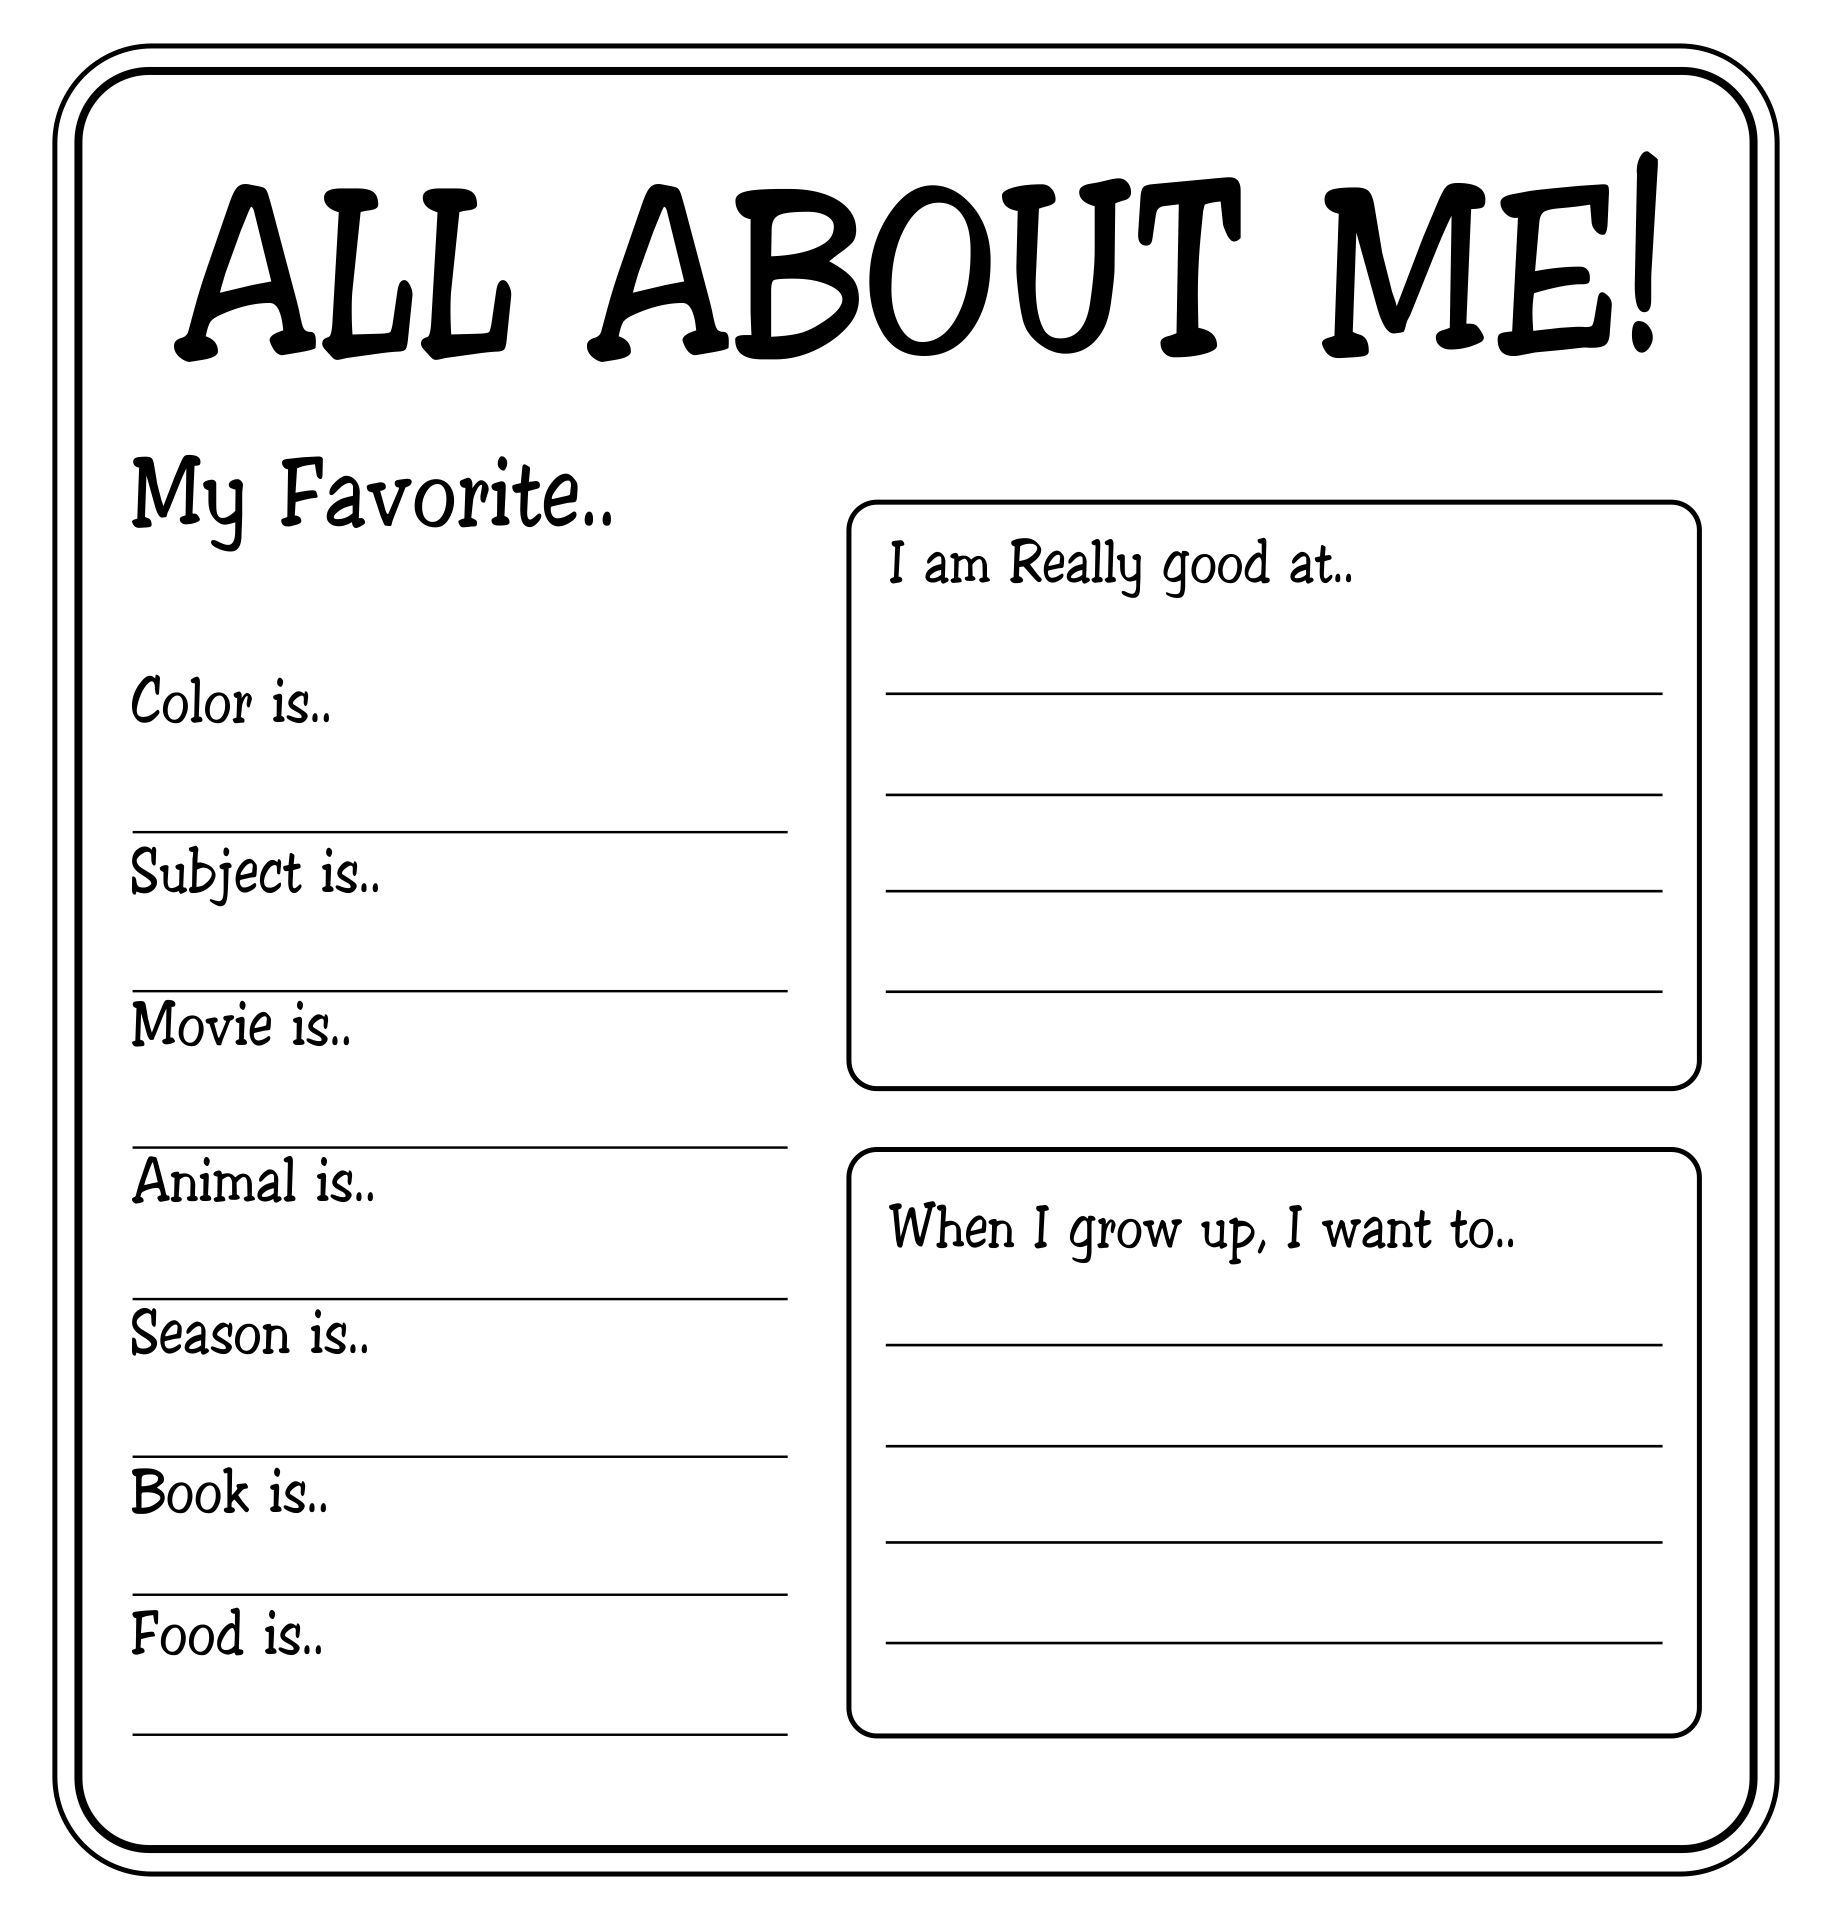 All About Me Form